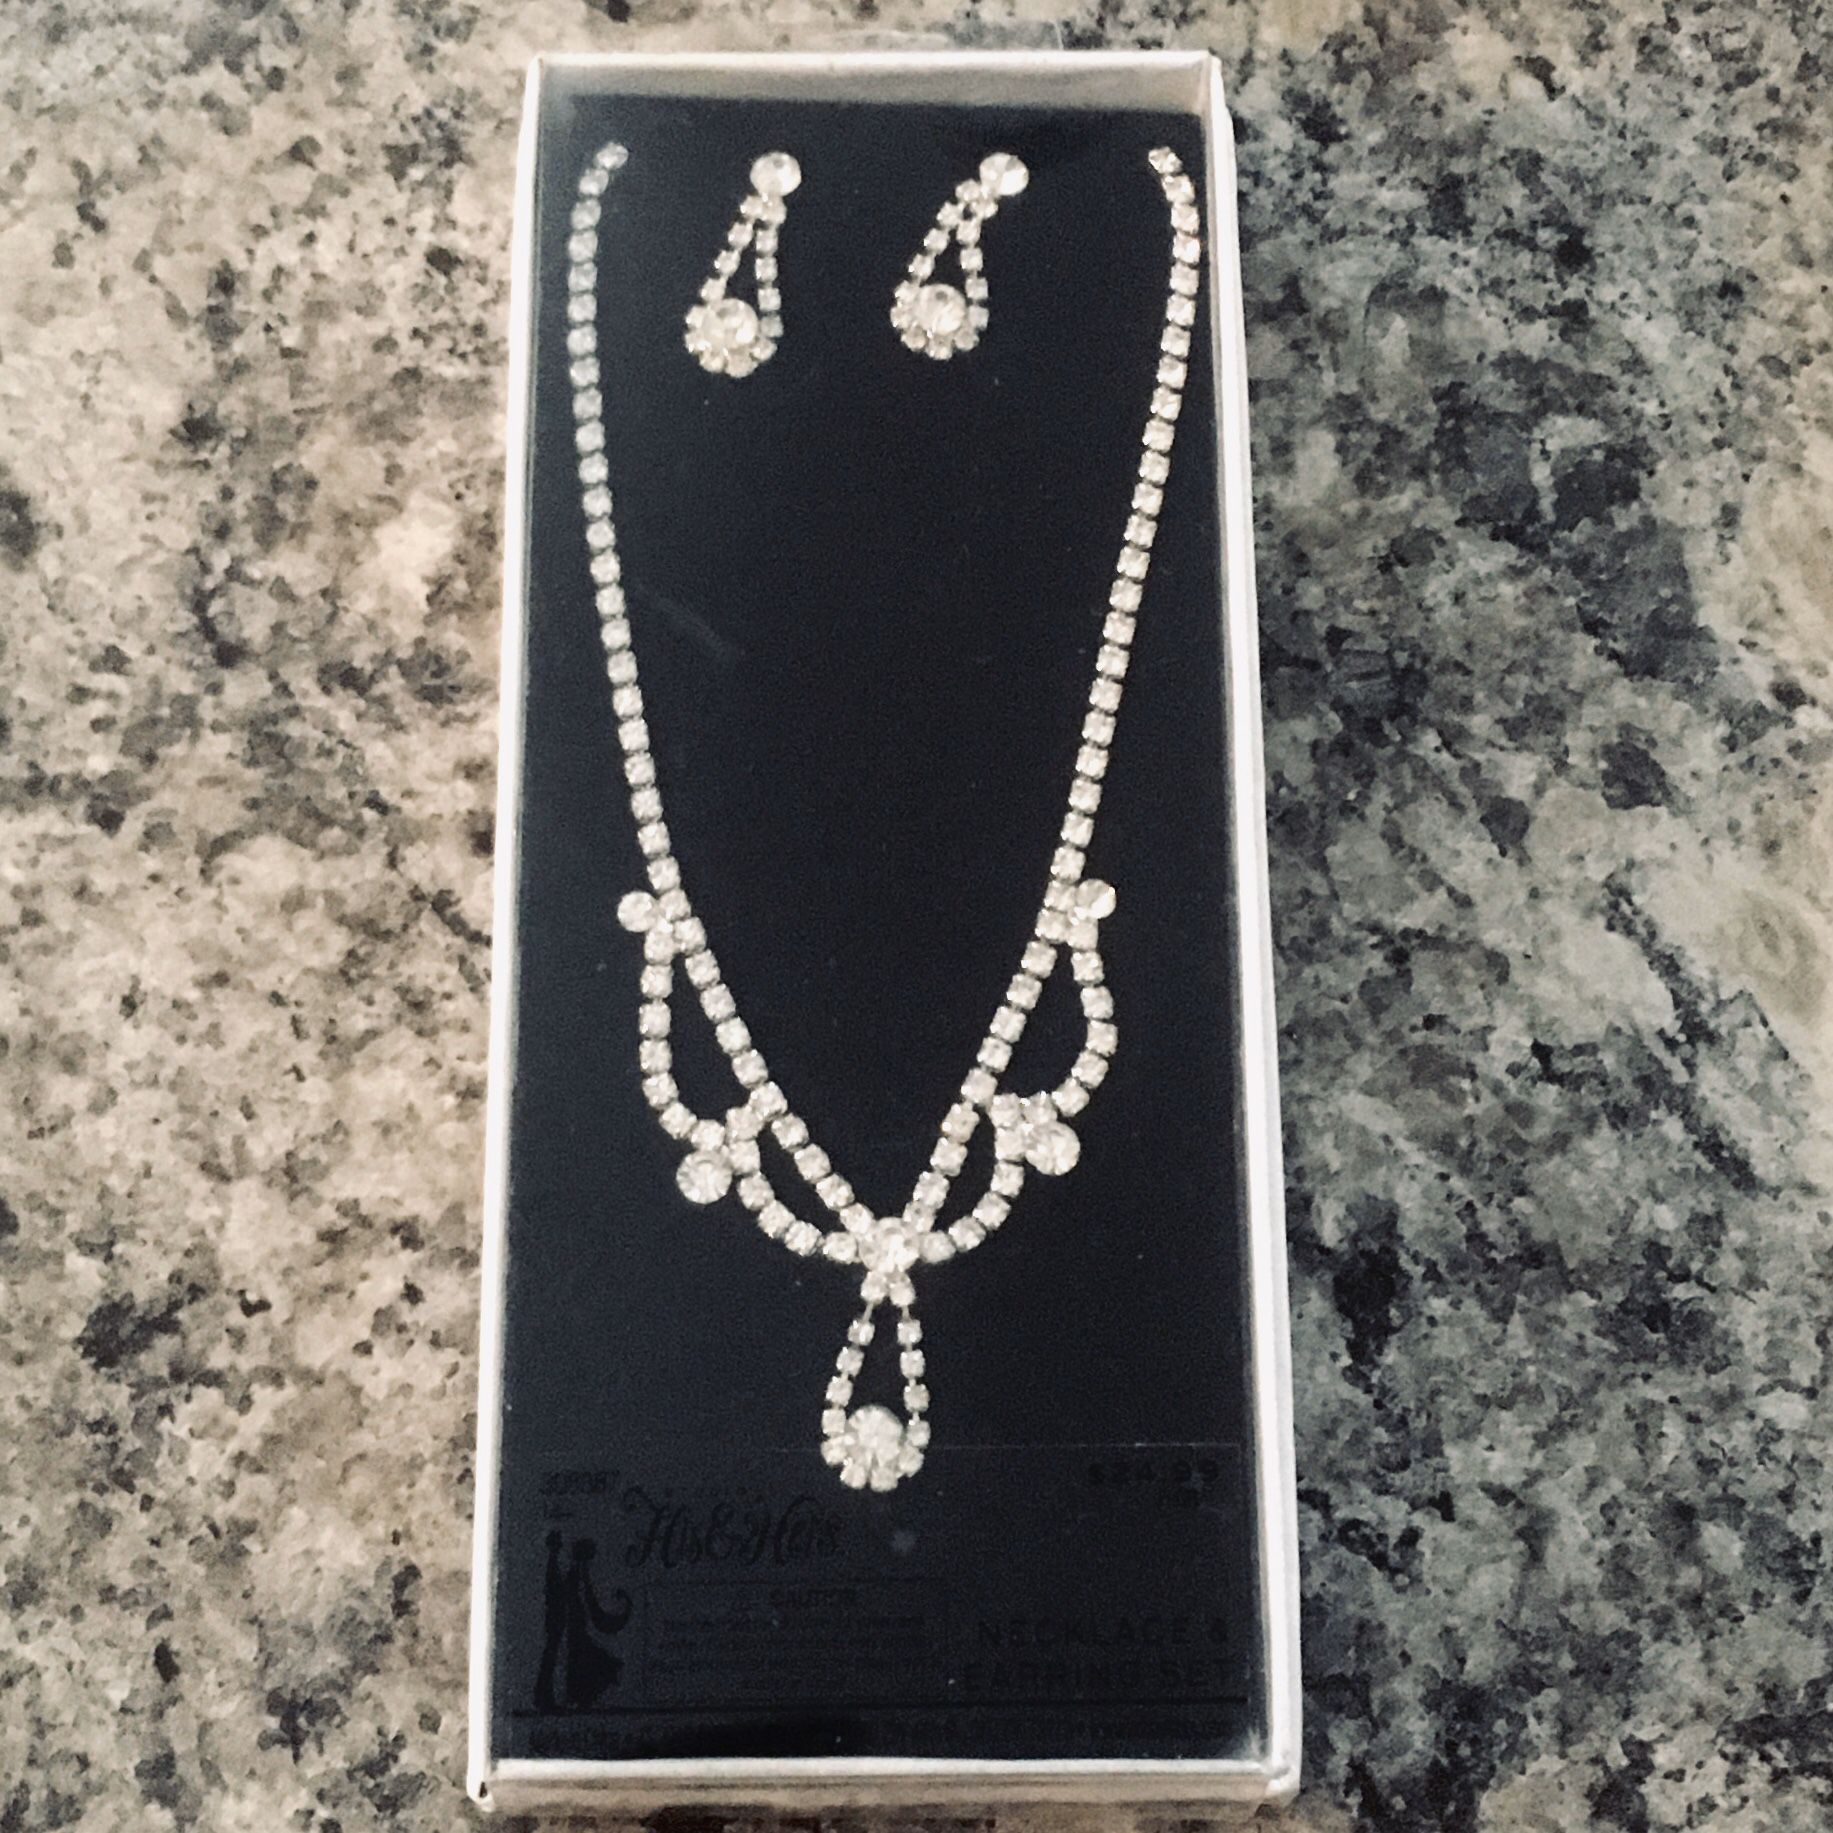 Sparkling diamond necklace and earrings